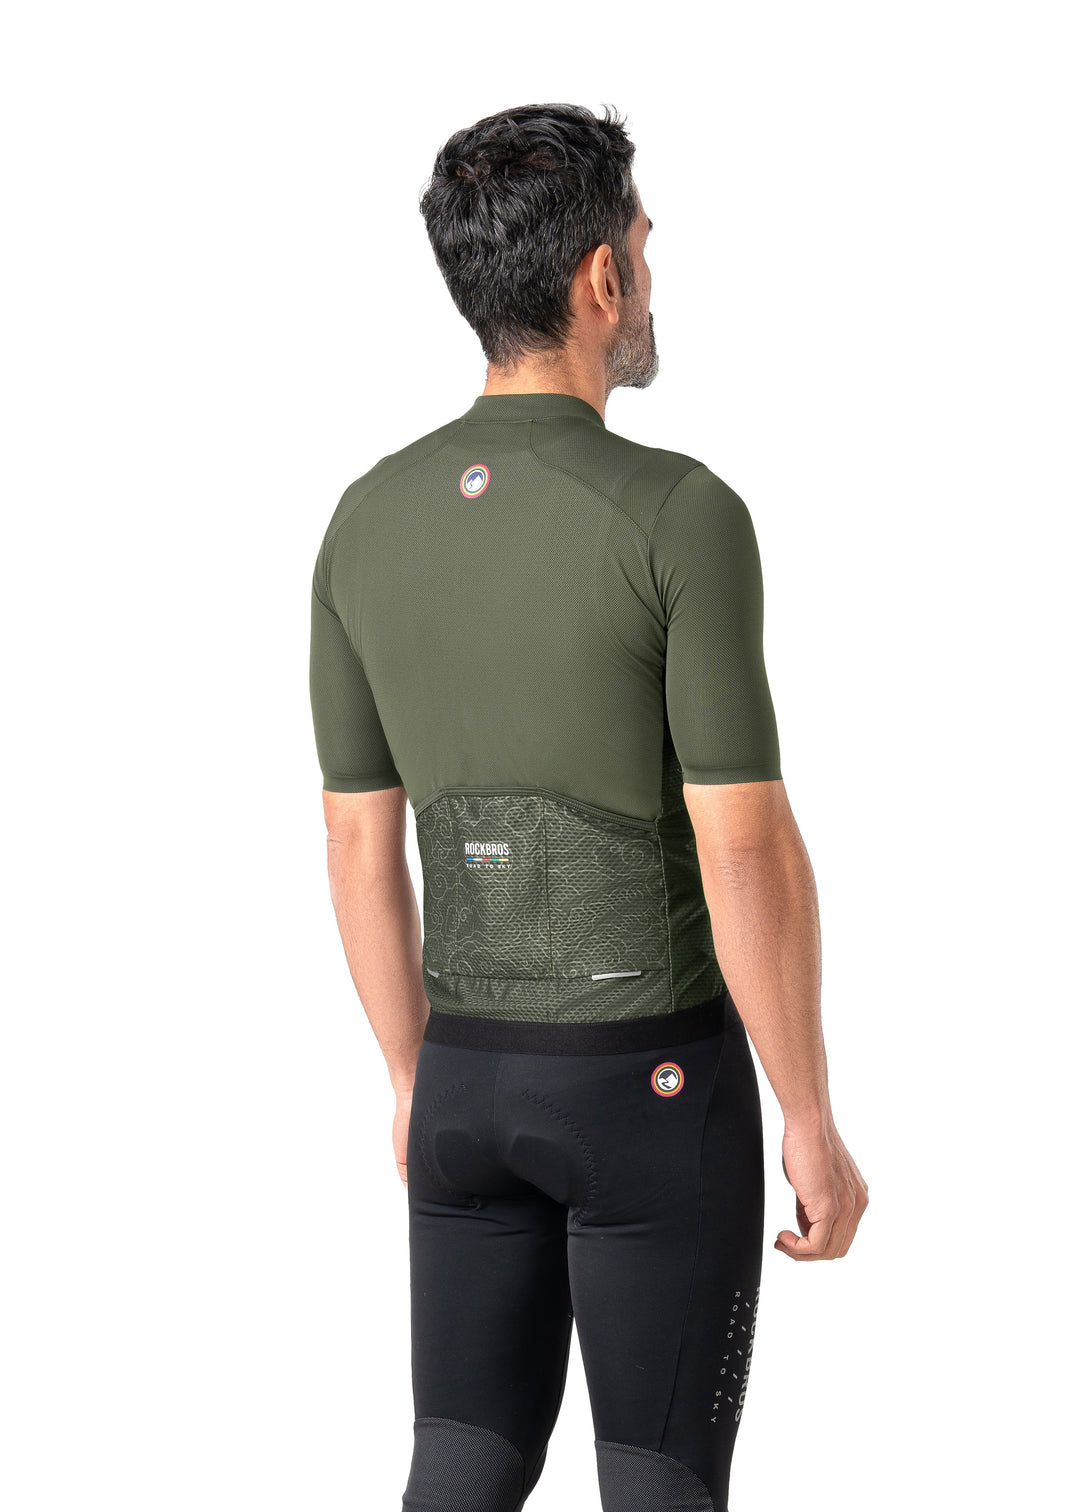 Men's Cycling Short-Sleeved Jersey